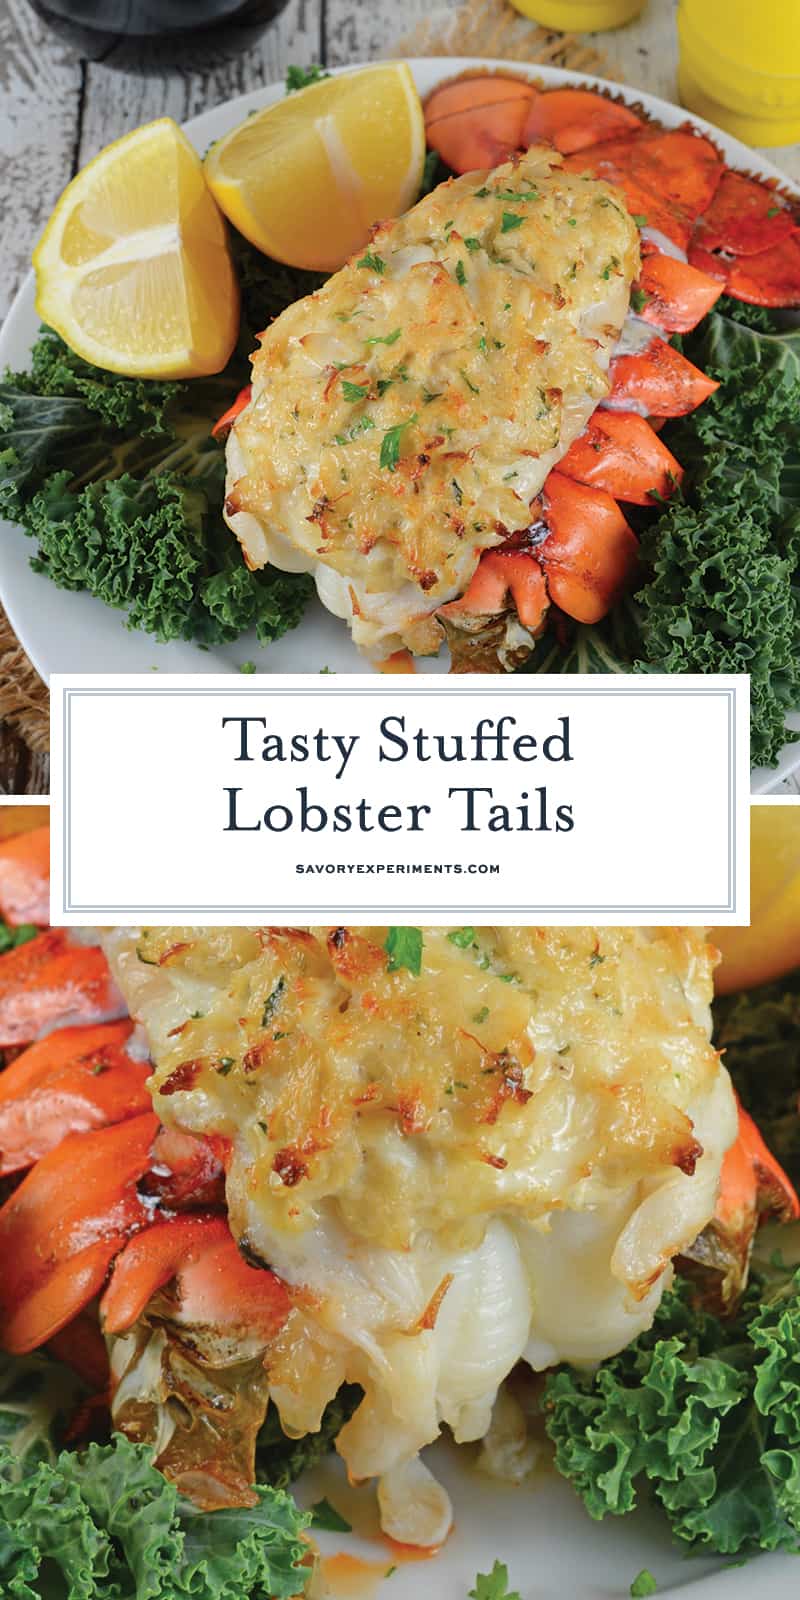 Crab Stuffed Lobster Tails is the ideal dinner for a special occasion. You won't believe how easy they are to make and how good they are! #lobsterrecipes #stuffedlobstertails www.savoryexperiments.com 